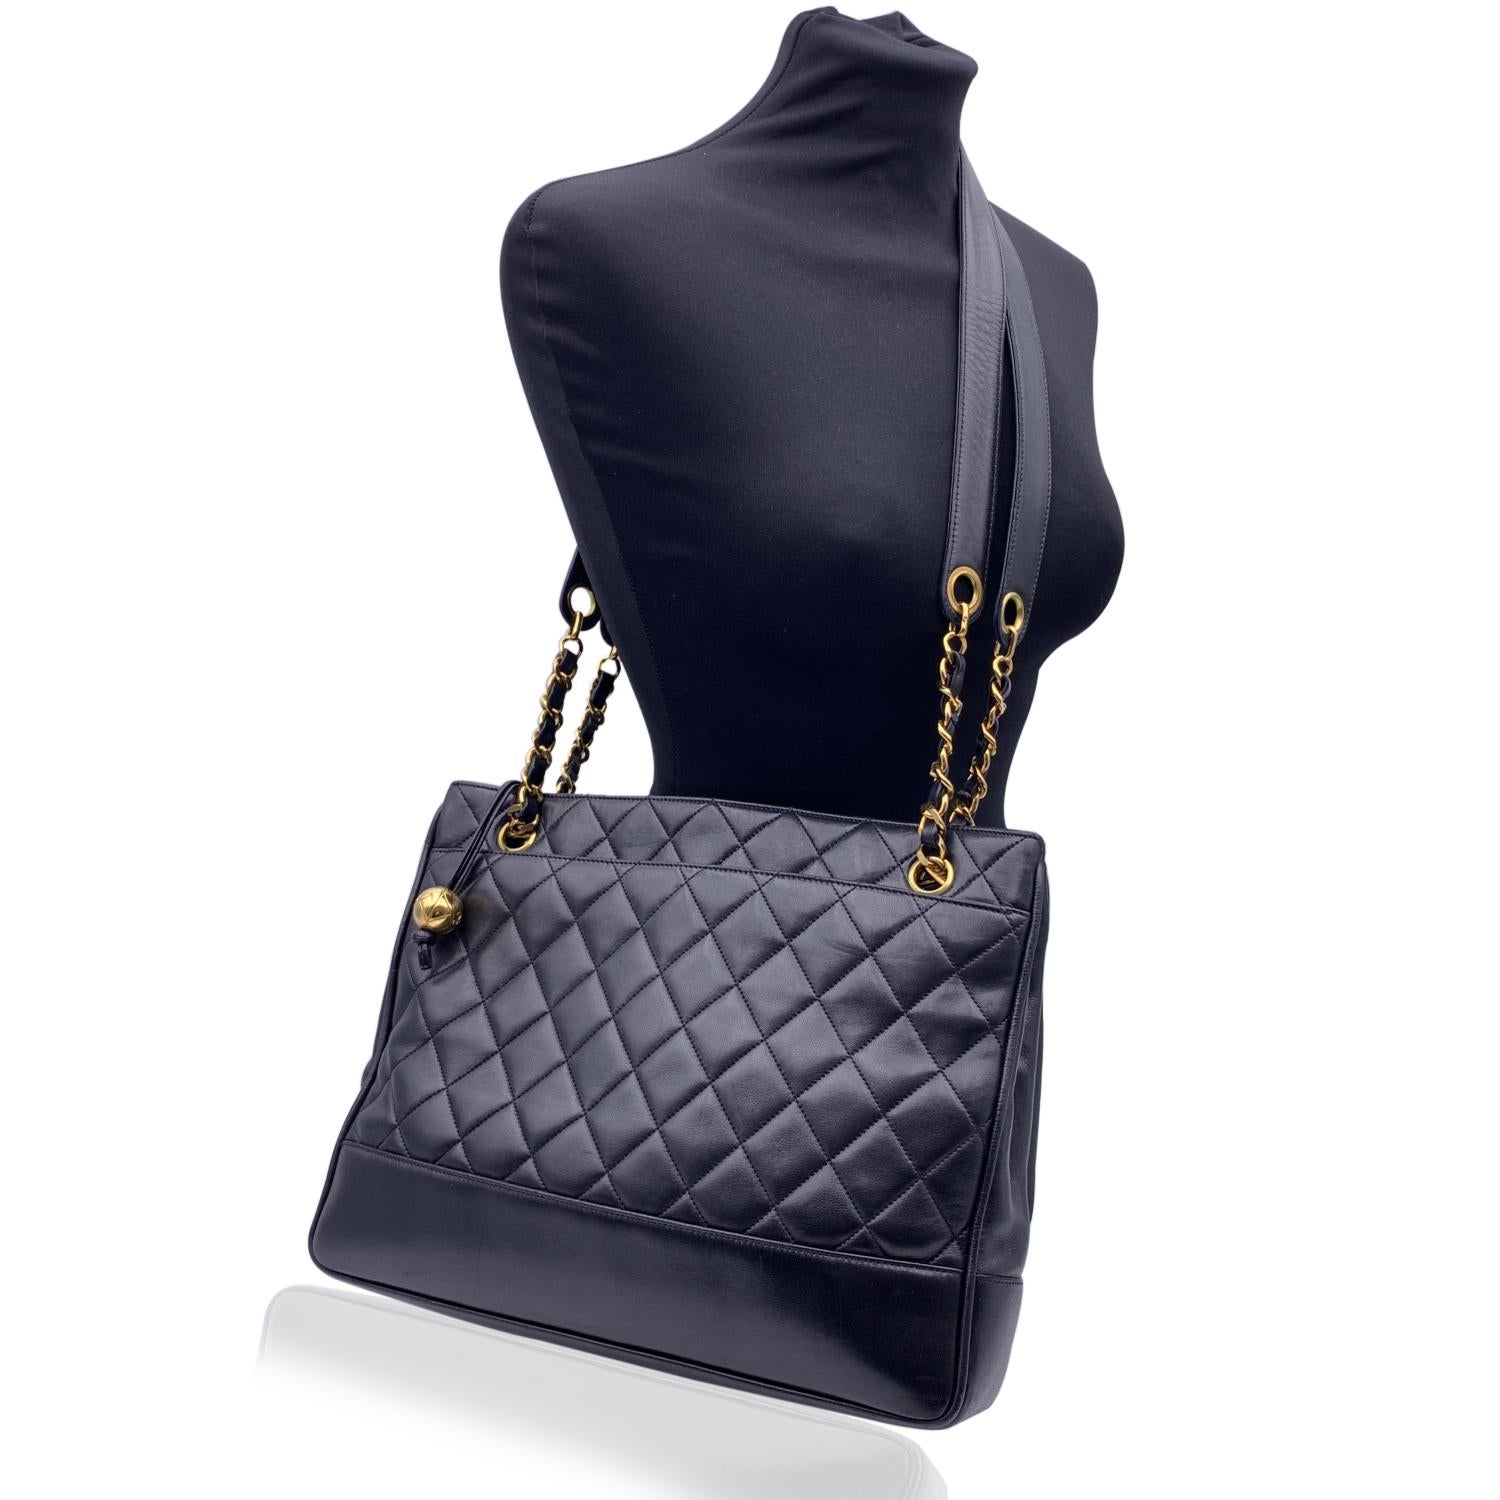 This beautiful Bag will come with a Certificate of Authenticity provided by Entrupy. The certificate will be provided at no further cost.

Vintage Chanel shoulder bag tote, partially quilted , from the first 1990s (1991-1994). Crafted in black